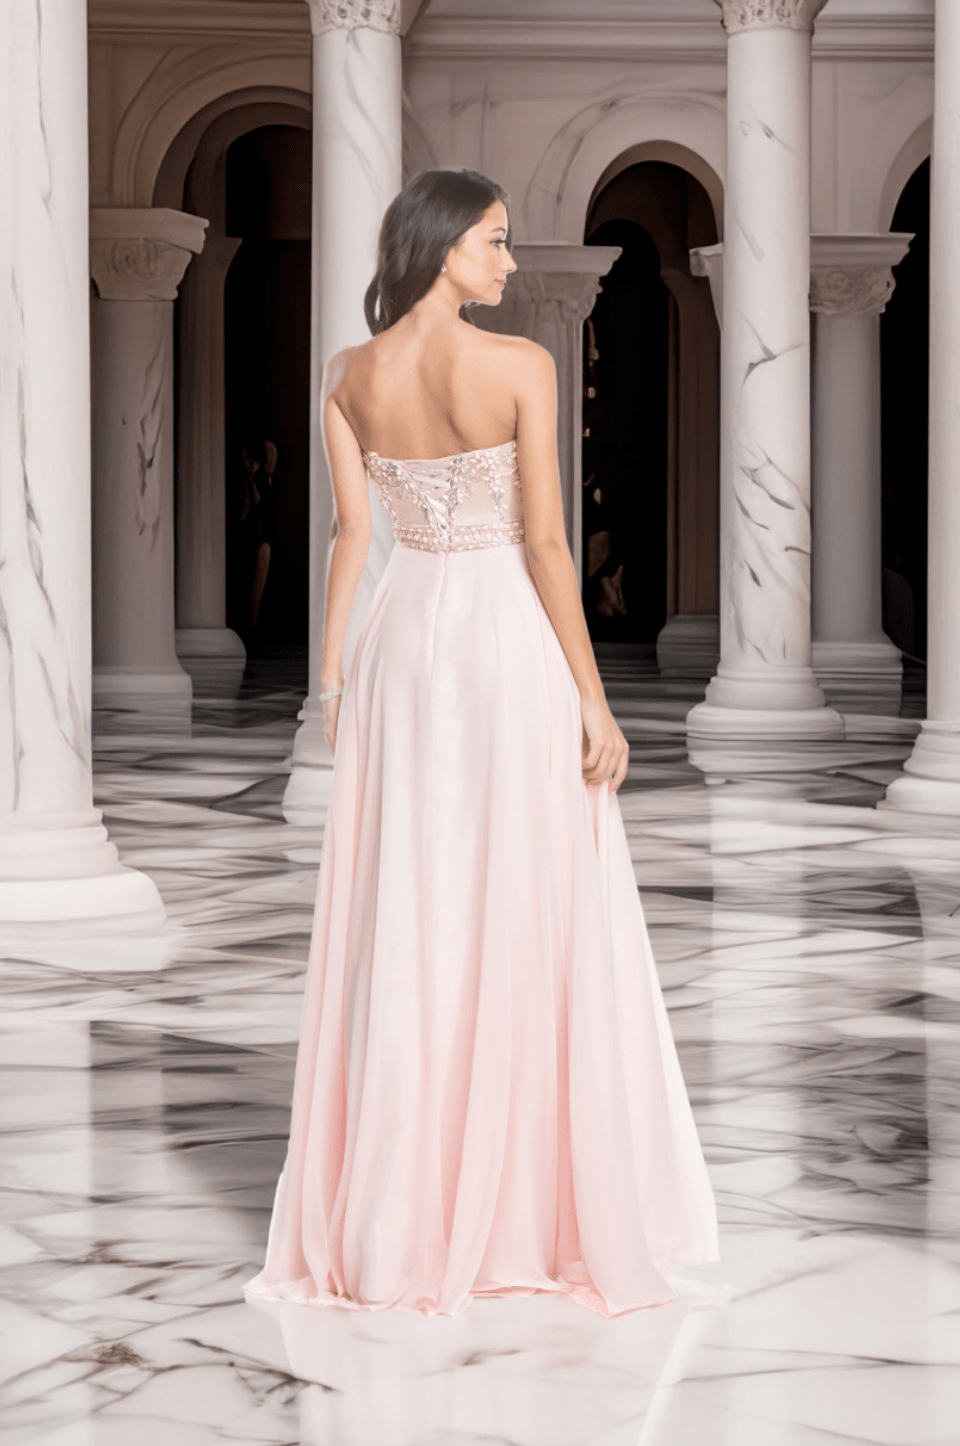 Strapless Flowing Chiffon Gown by Aspeed - NORMA REED